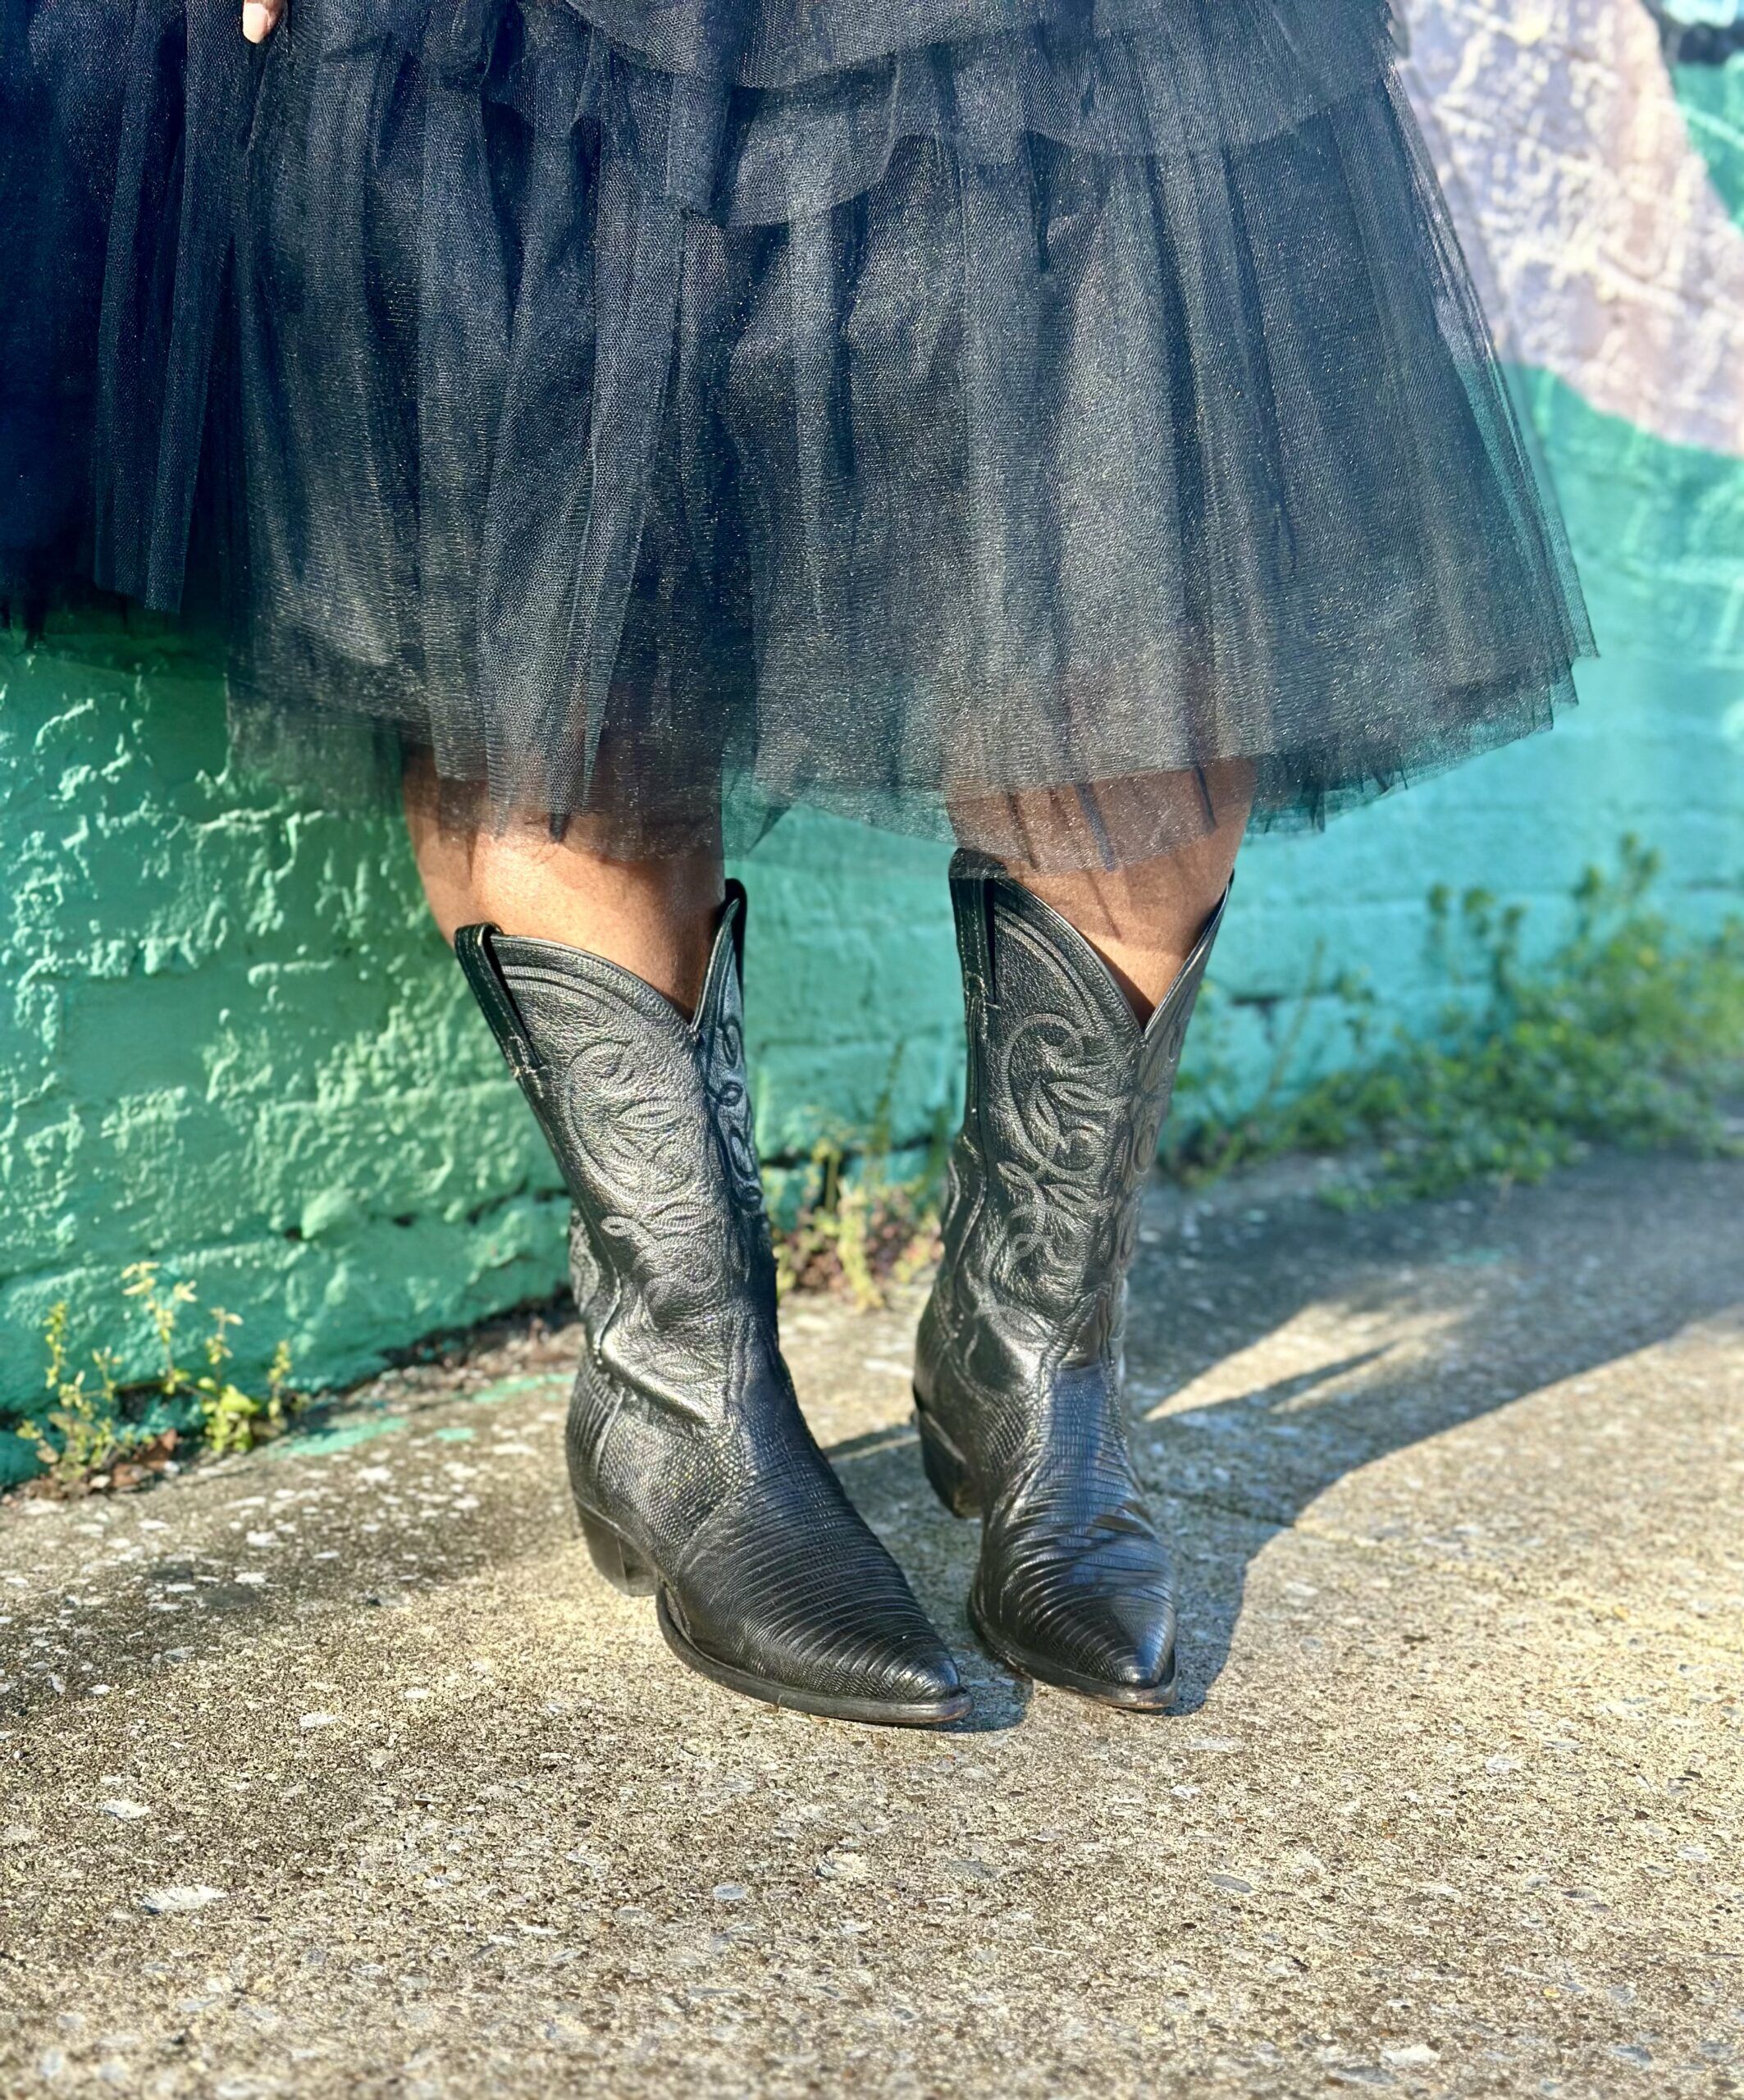 How To Combine Boots With Dresses And Skirts?